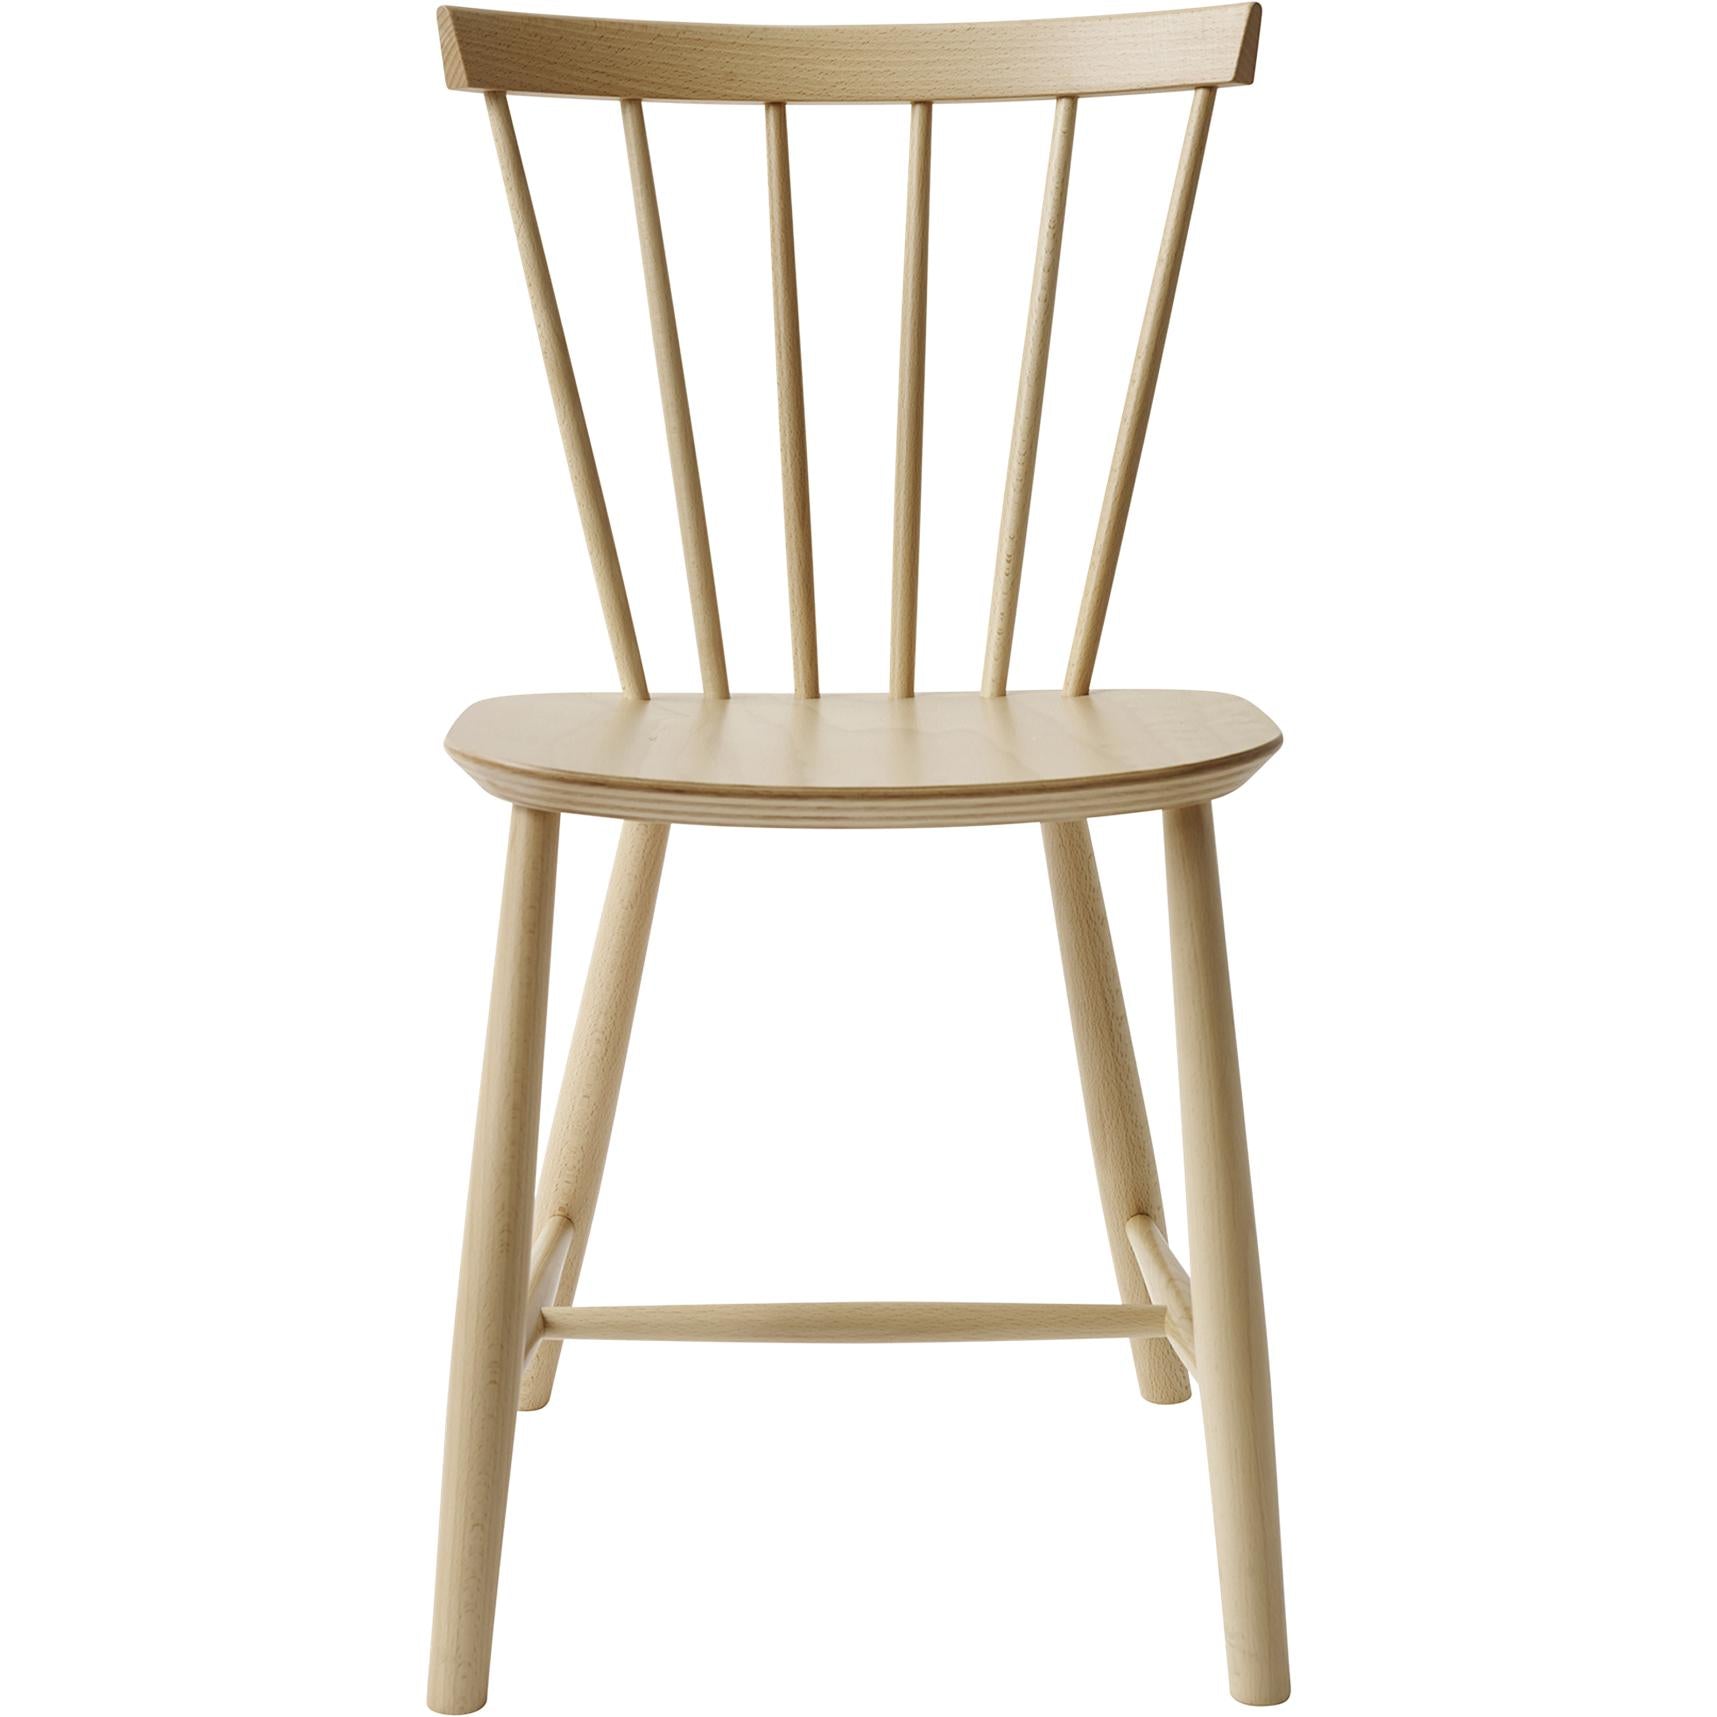 Fdb Møbler Poul Volther J46 Dining Chair Beech, Natural, H 80cm